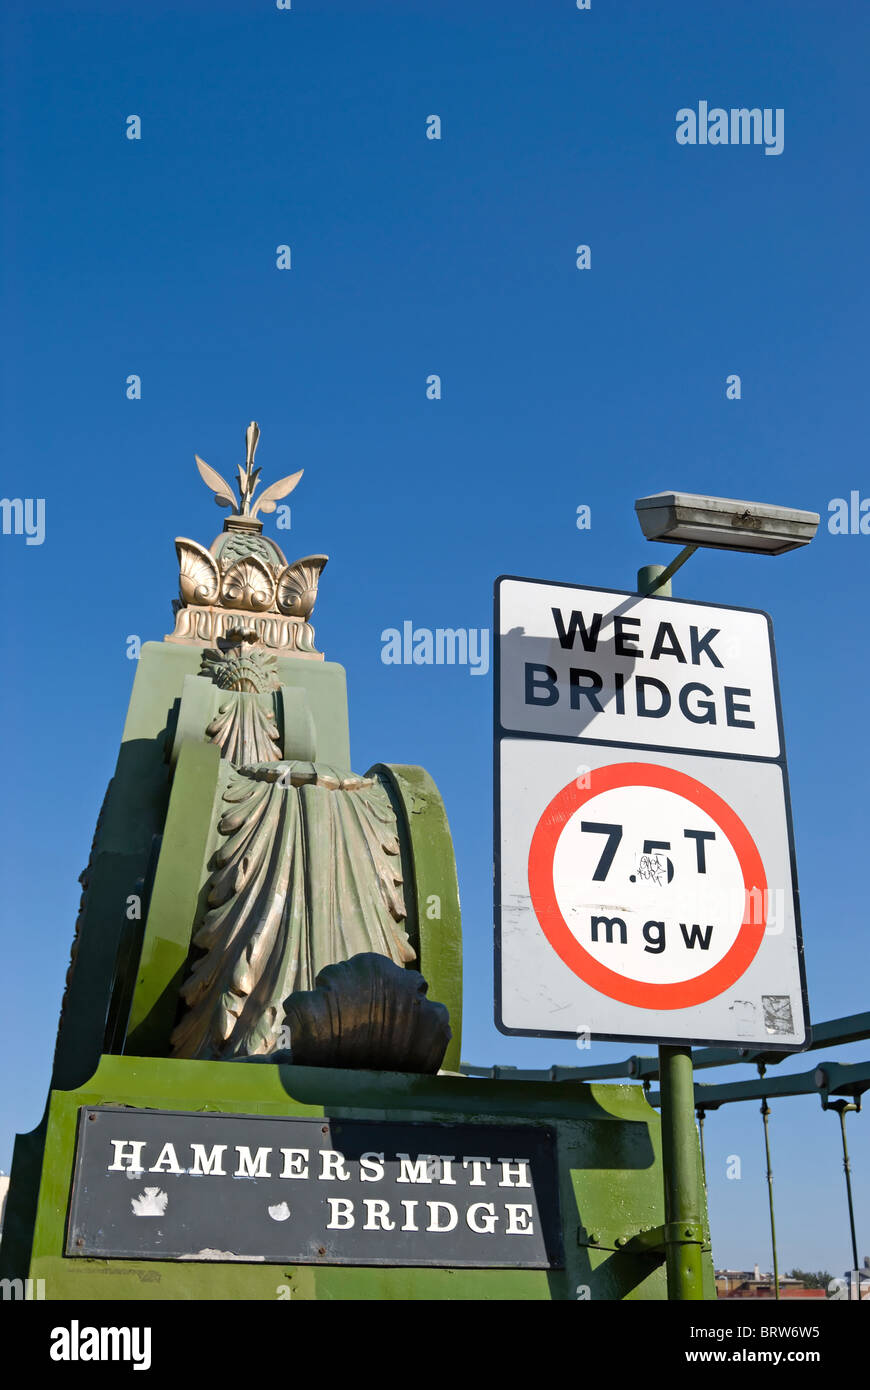 weak bridge sign with warning of traffic being restricted to 7.5 tonnes or less, at hammersmith bridge, london, england Stock Photo